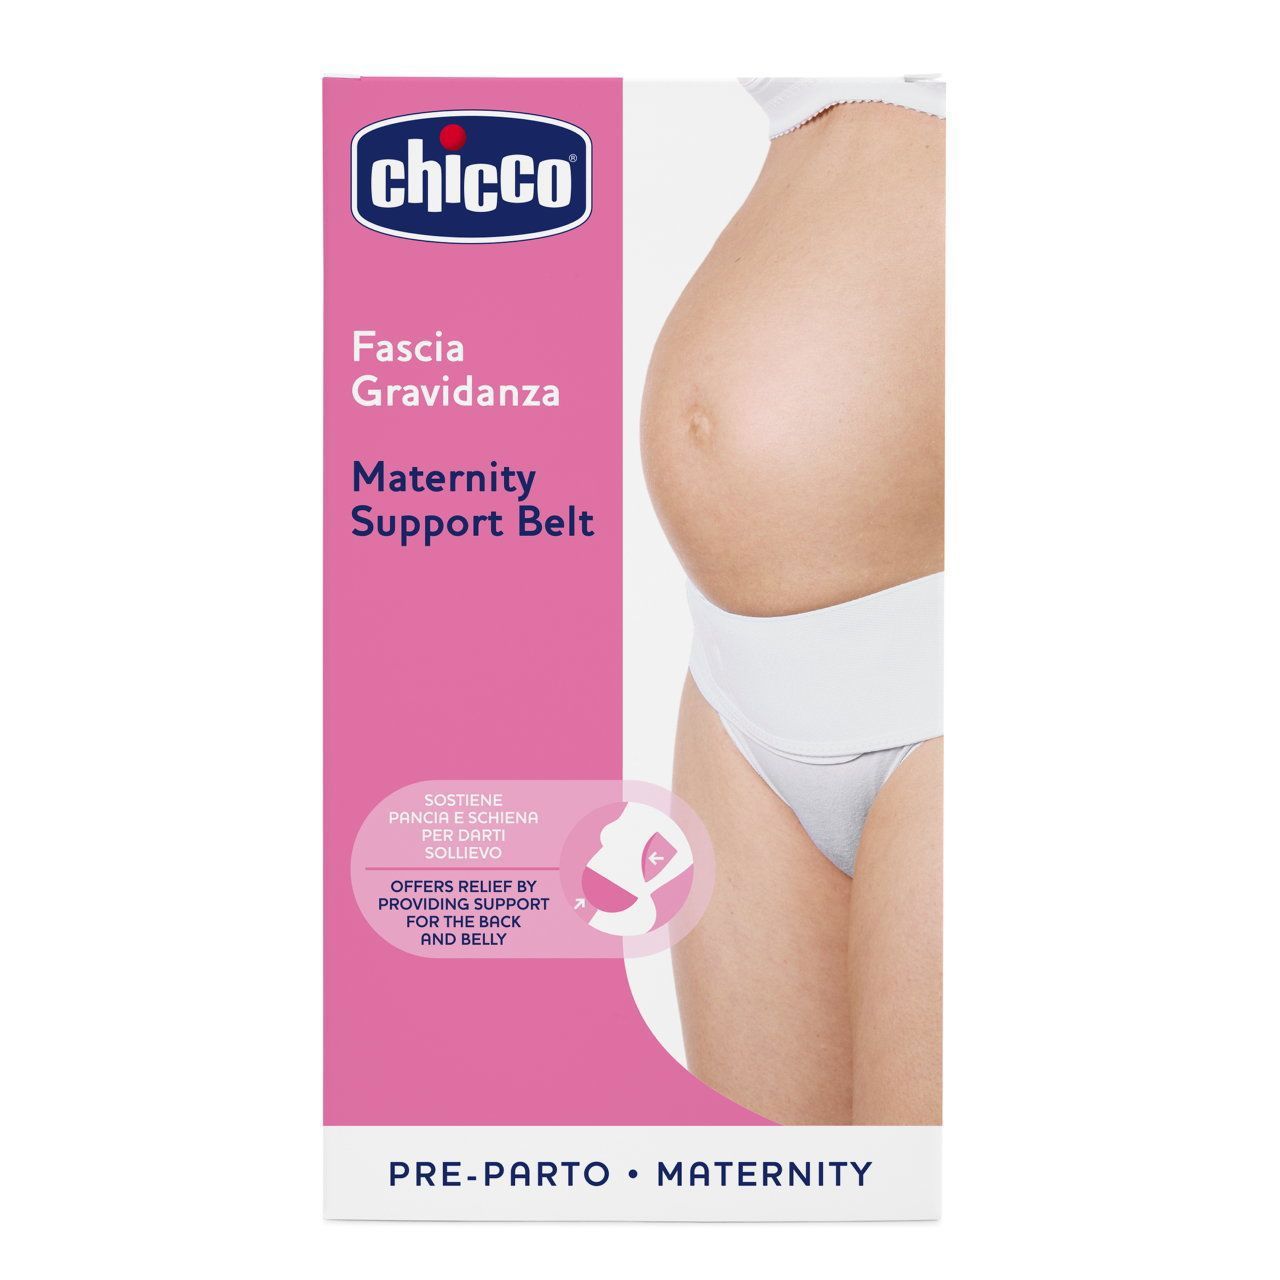 MAMMY PREGNANCY BAND from chicco size s